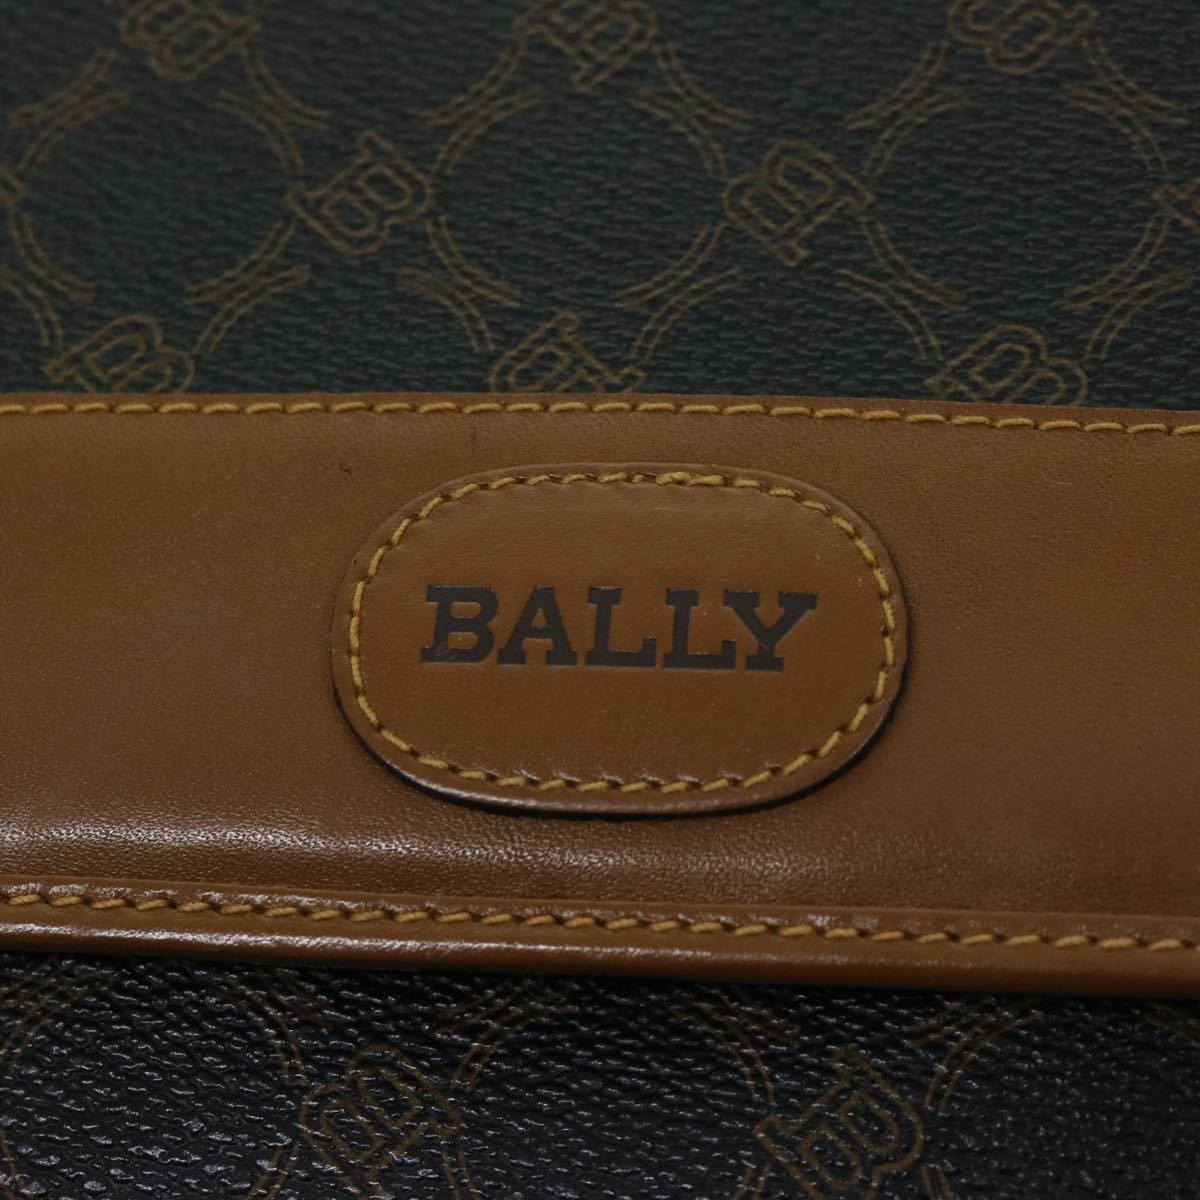 BALLY Shoulder Bag PVC Leather Brown Auth 66713